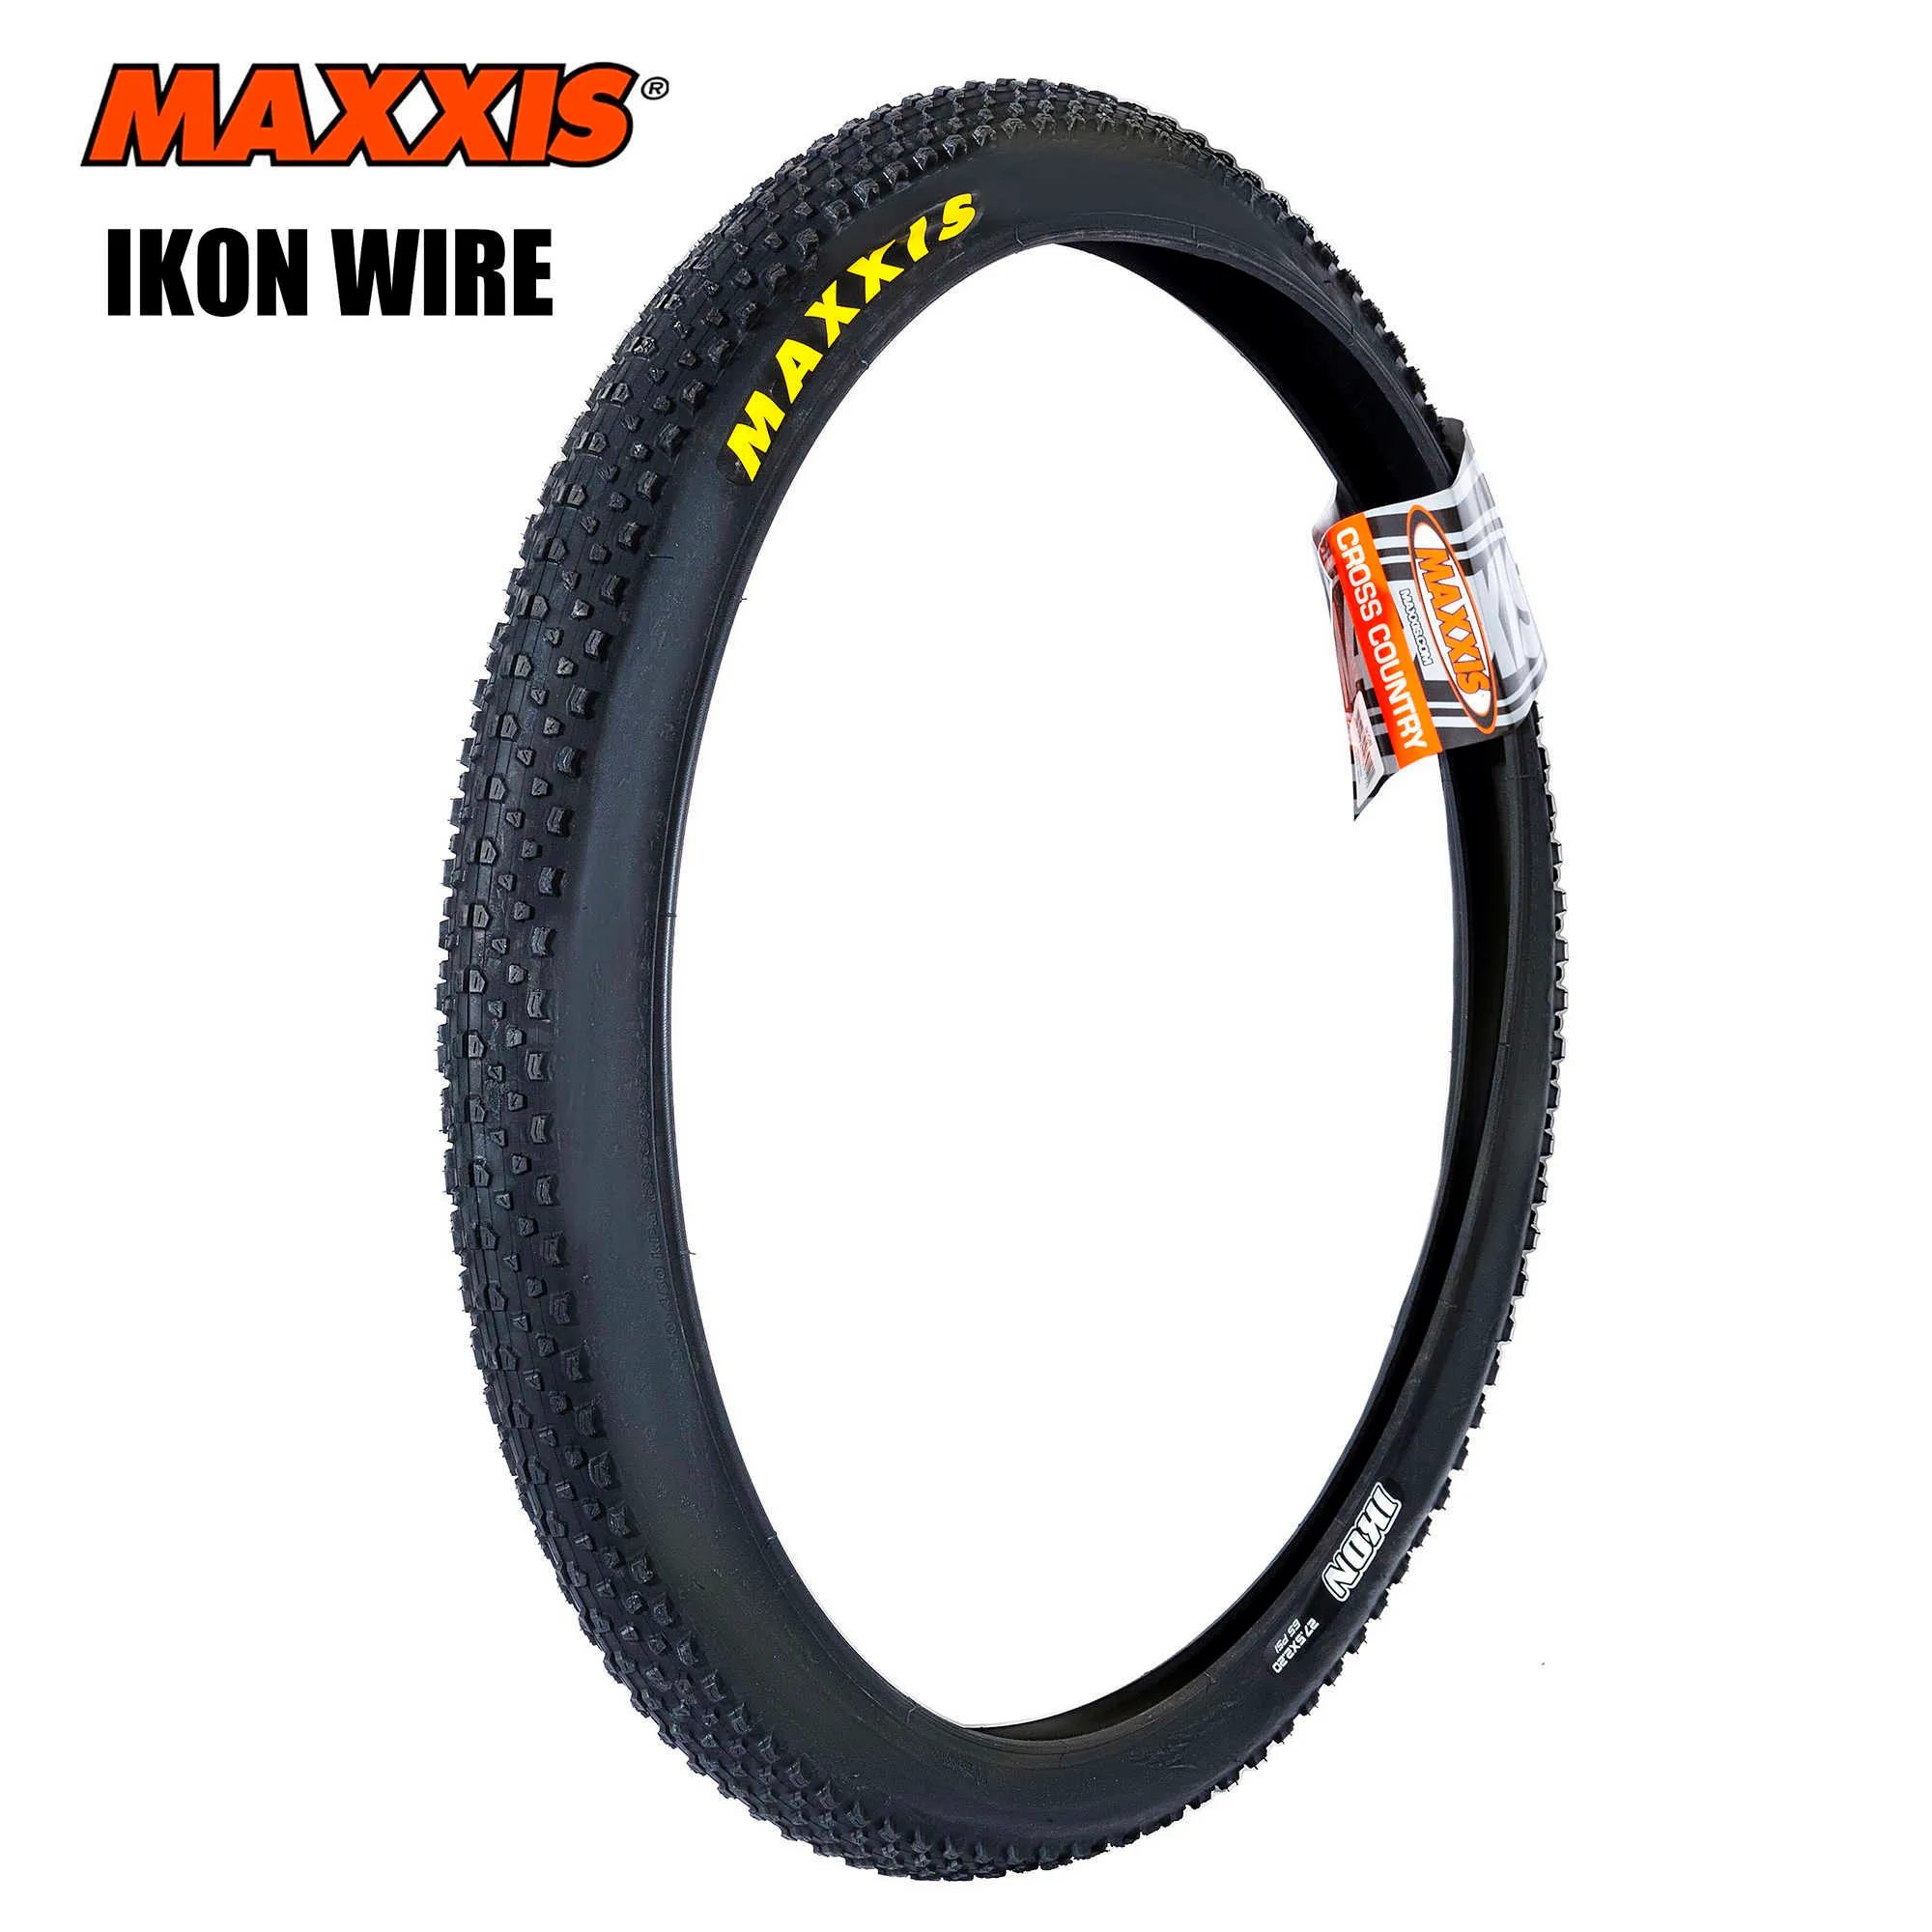 Bike Maxxis Ikon 29 Mtb Tires Wire Tire MOUNTAIN BIKE TYRE Clincher 26 27.5 29 INCH Original Yellow White Bicycle Tyres 0213